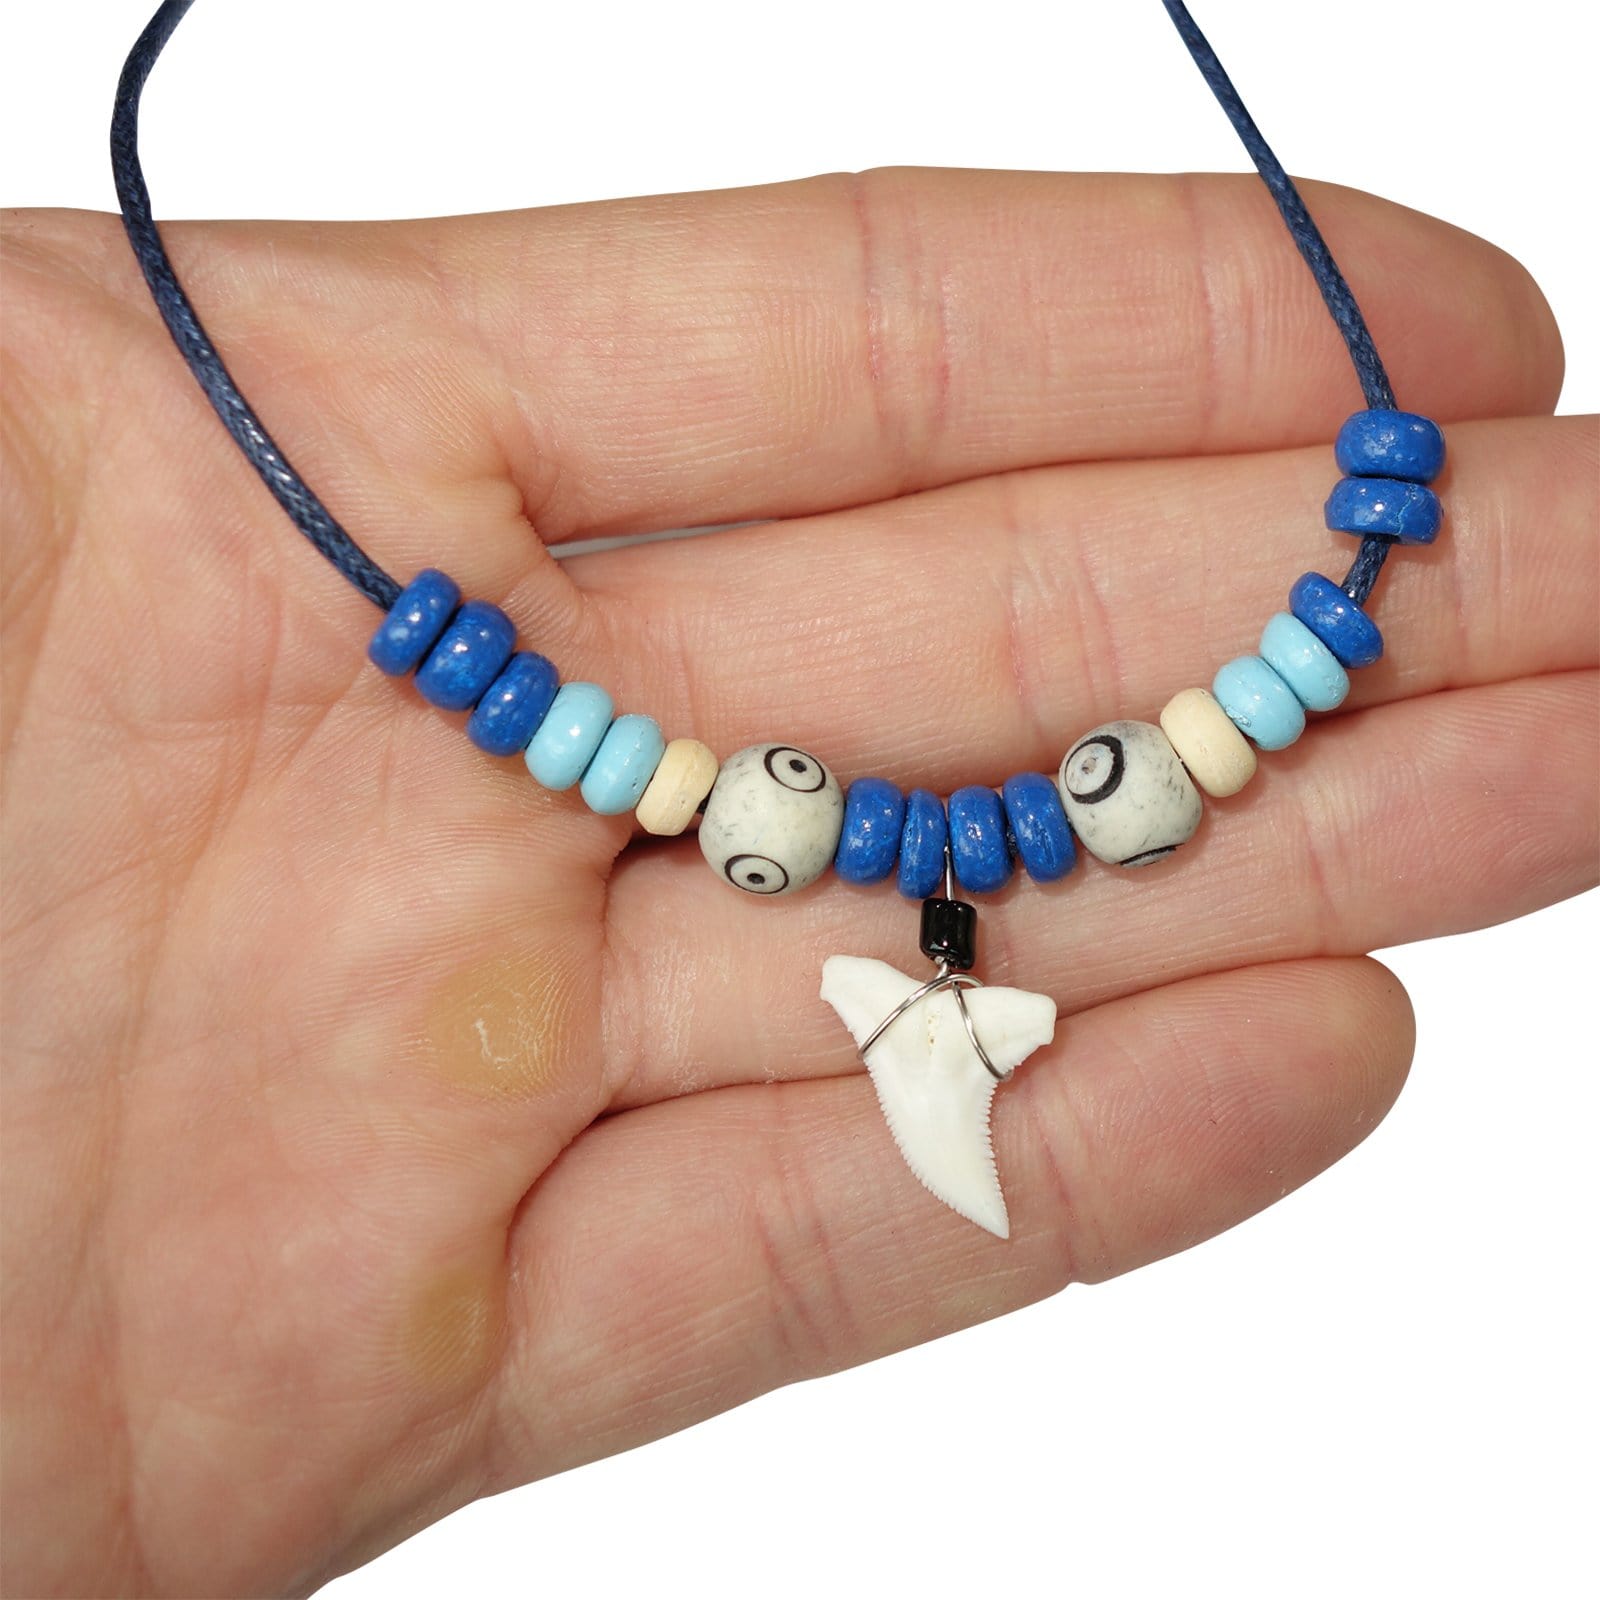 Imitation Resin Shark Tooth Pendant Blue Cord Chain Wood Beads Surf Necklace Men Women Jewellery